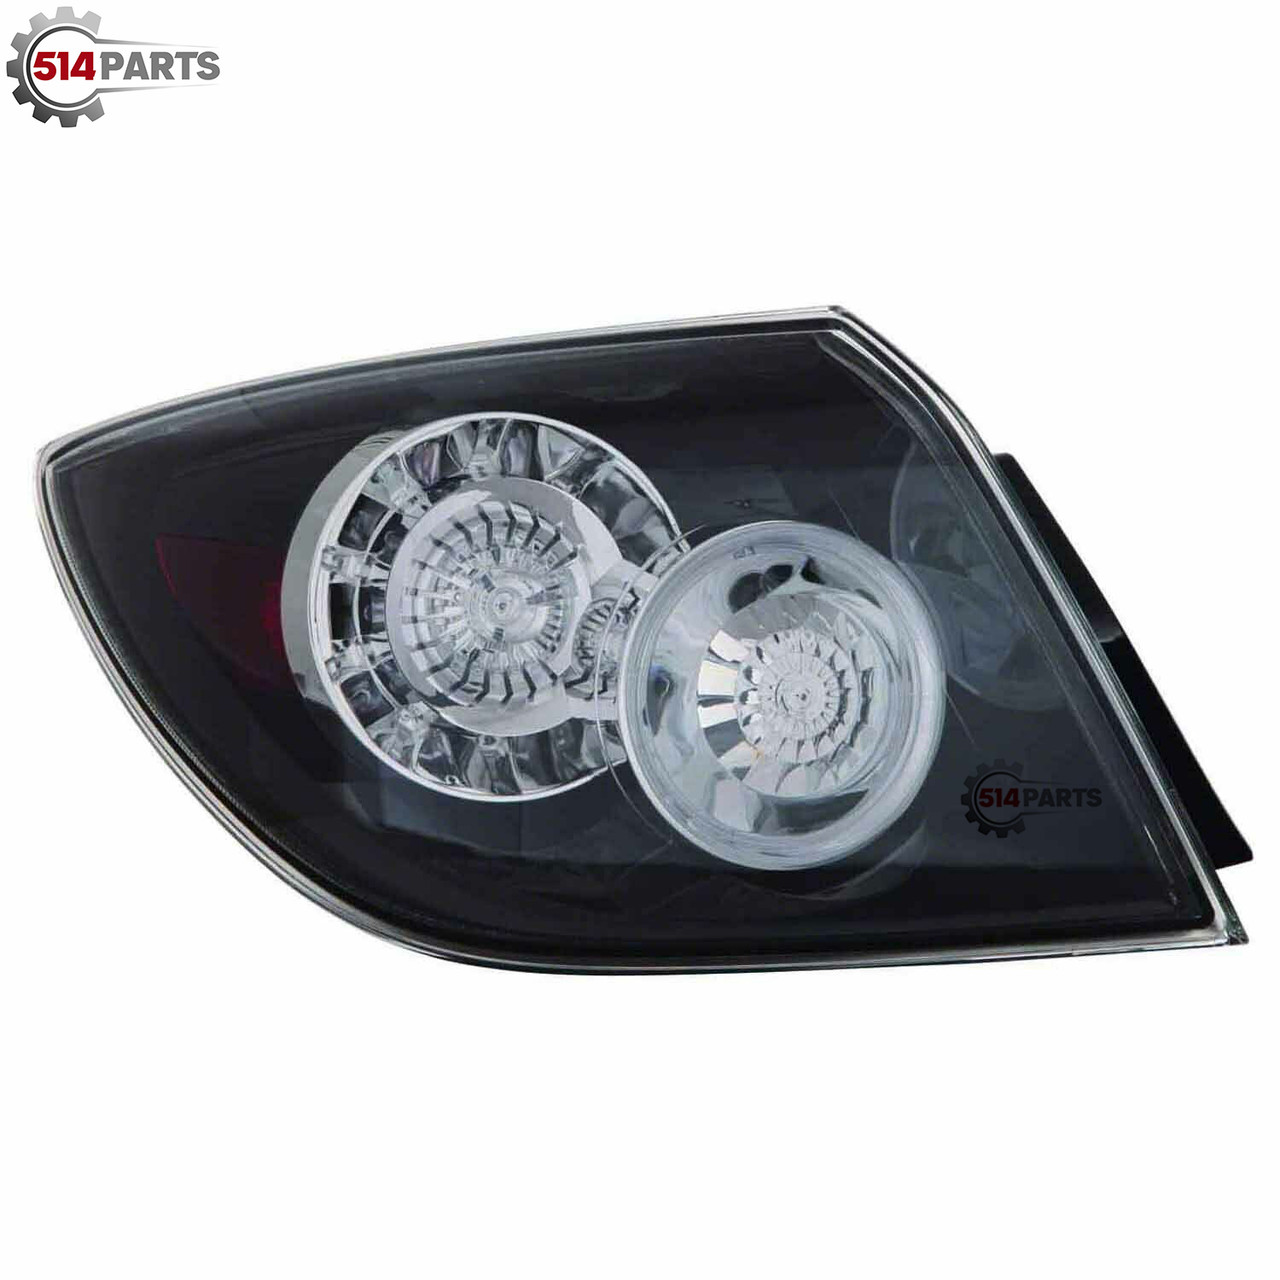 2005 - 2009 MAZDA 3 Hatchback LED TAIL LIGHTS High Quality - PHARES ARRIERE a DEL Haute Qualite